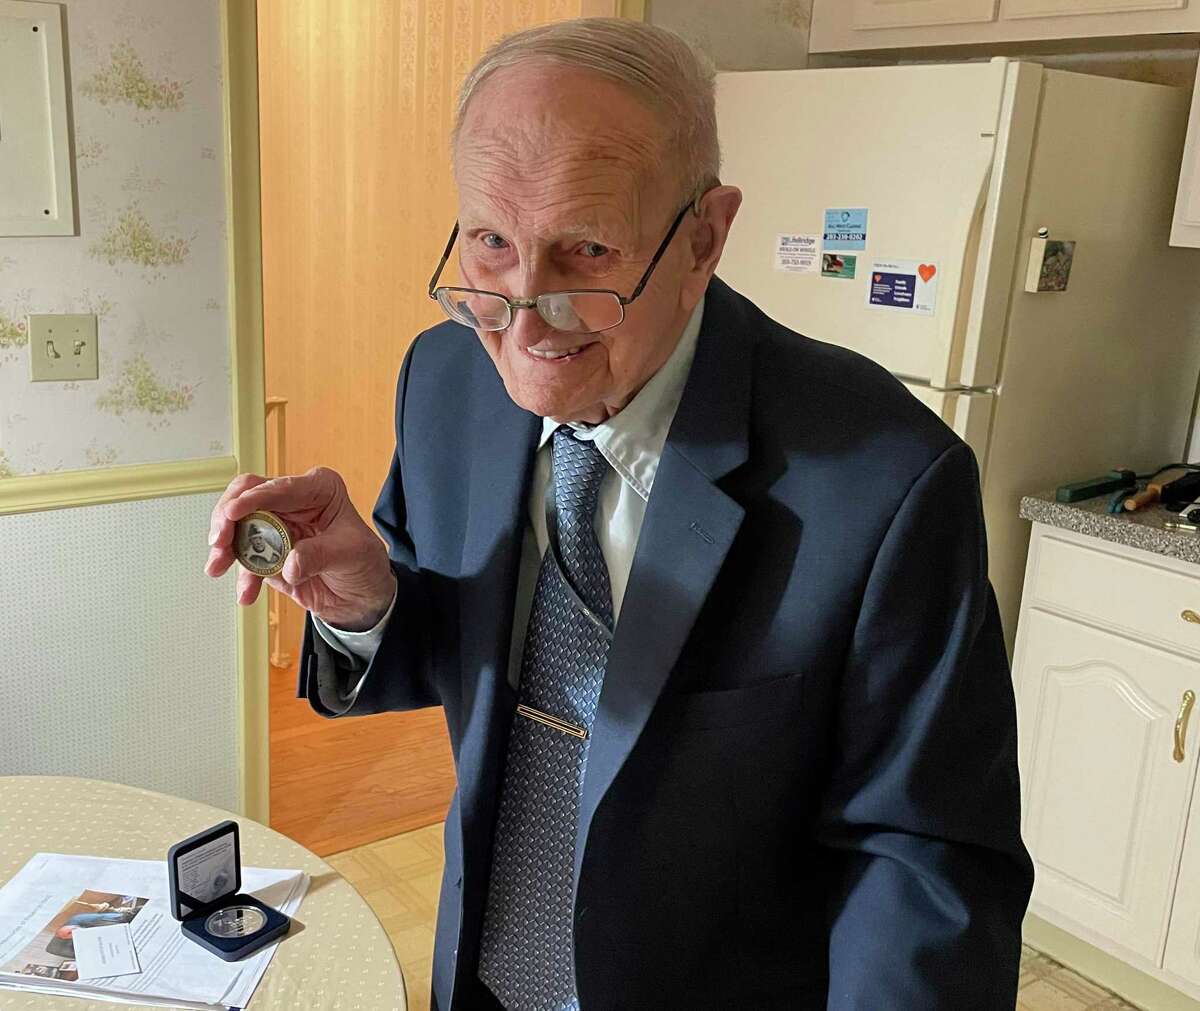 Robert Muthersbaugh, a 100-year-old Hamden resident, has been honored for his participation in the liberation of Czechoslovakia during World War II. He served as a radio operator.